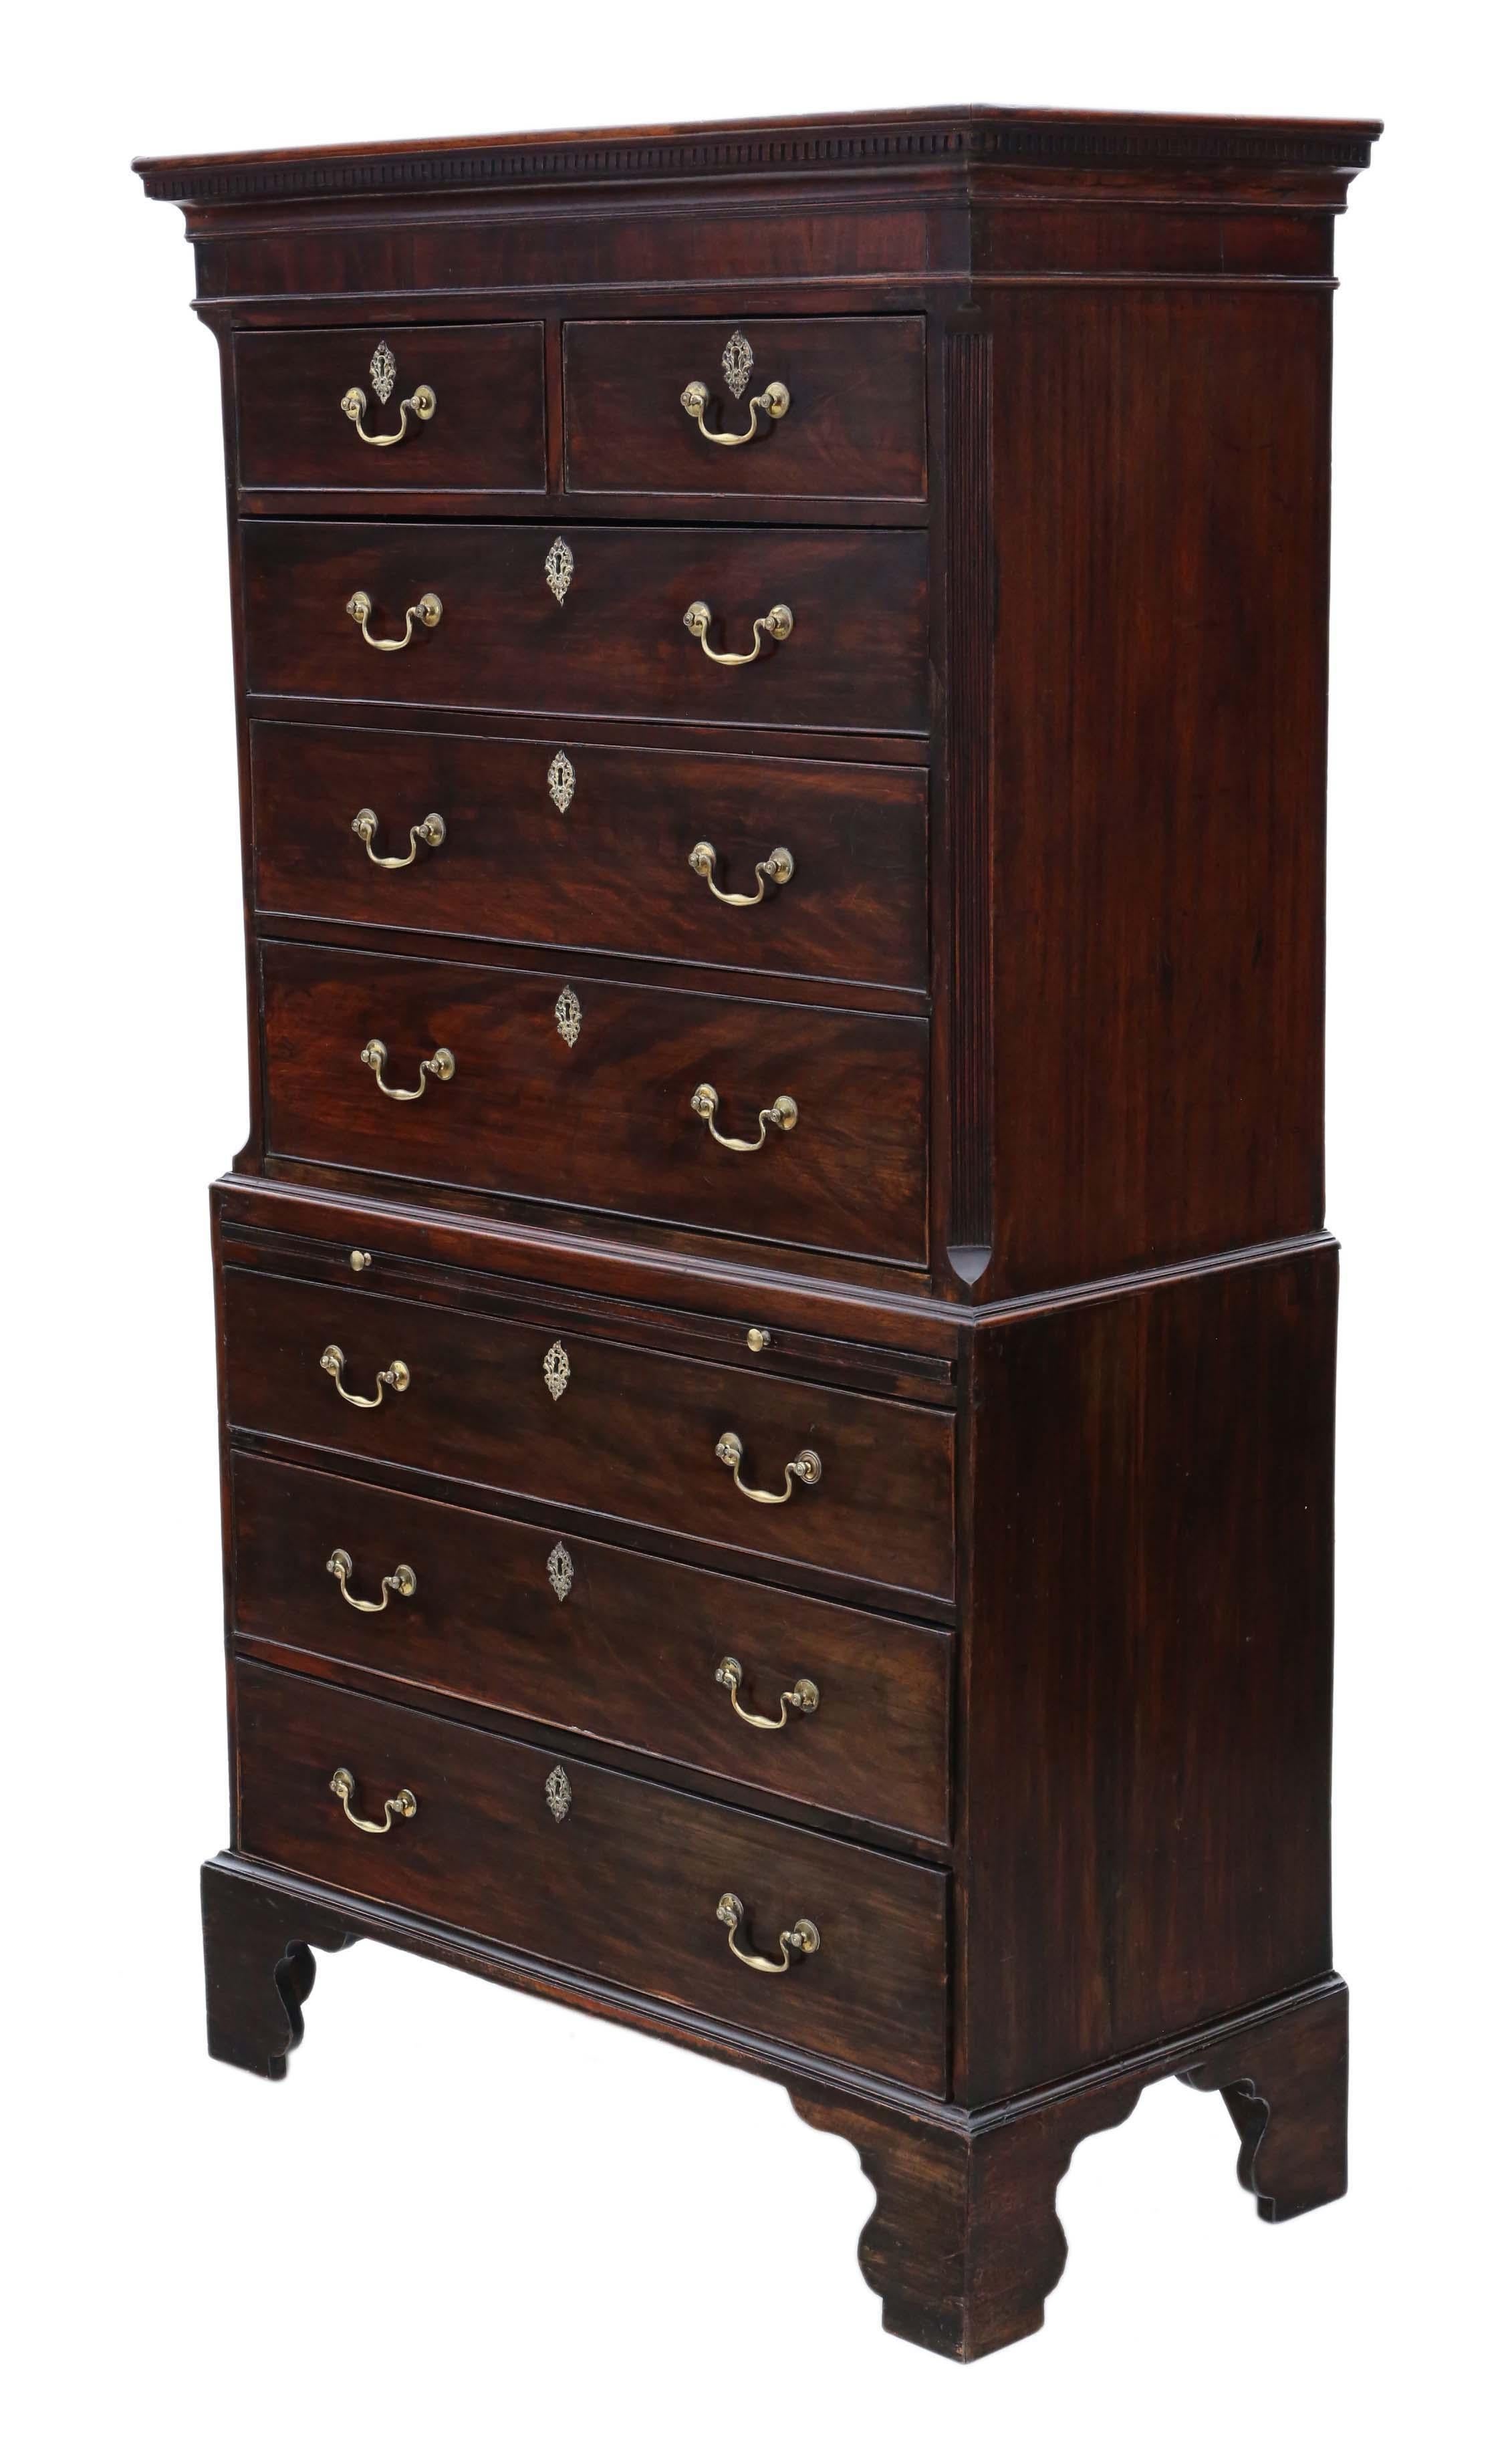 Antique 18th Century mahogany tallboy chest on chest of drawers.
Lovely age, colour and patina. Drawers slide freely.

Splits into two halves for transport.

No loose joints and the oak lined drawers slide freely.

Overall maximum dimensions: 111cmW